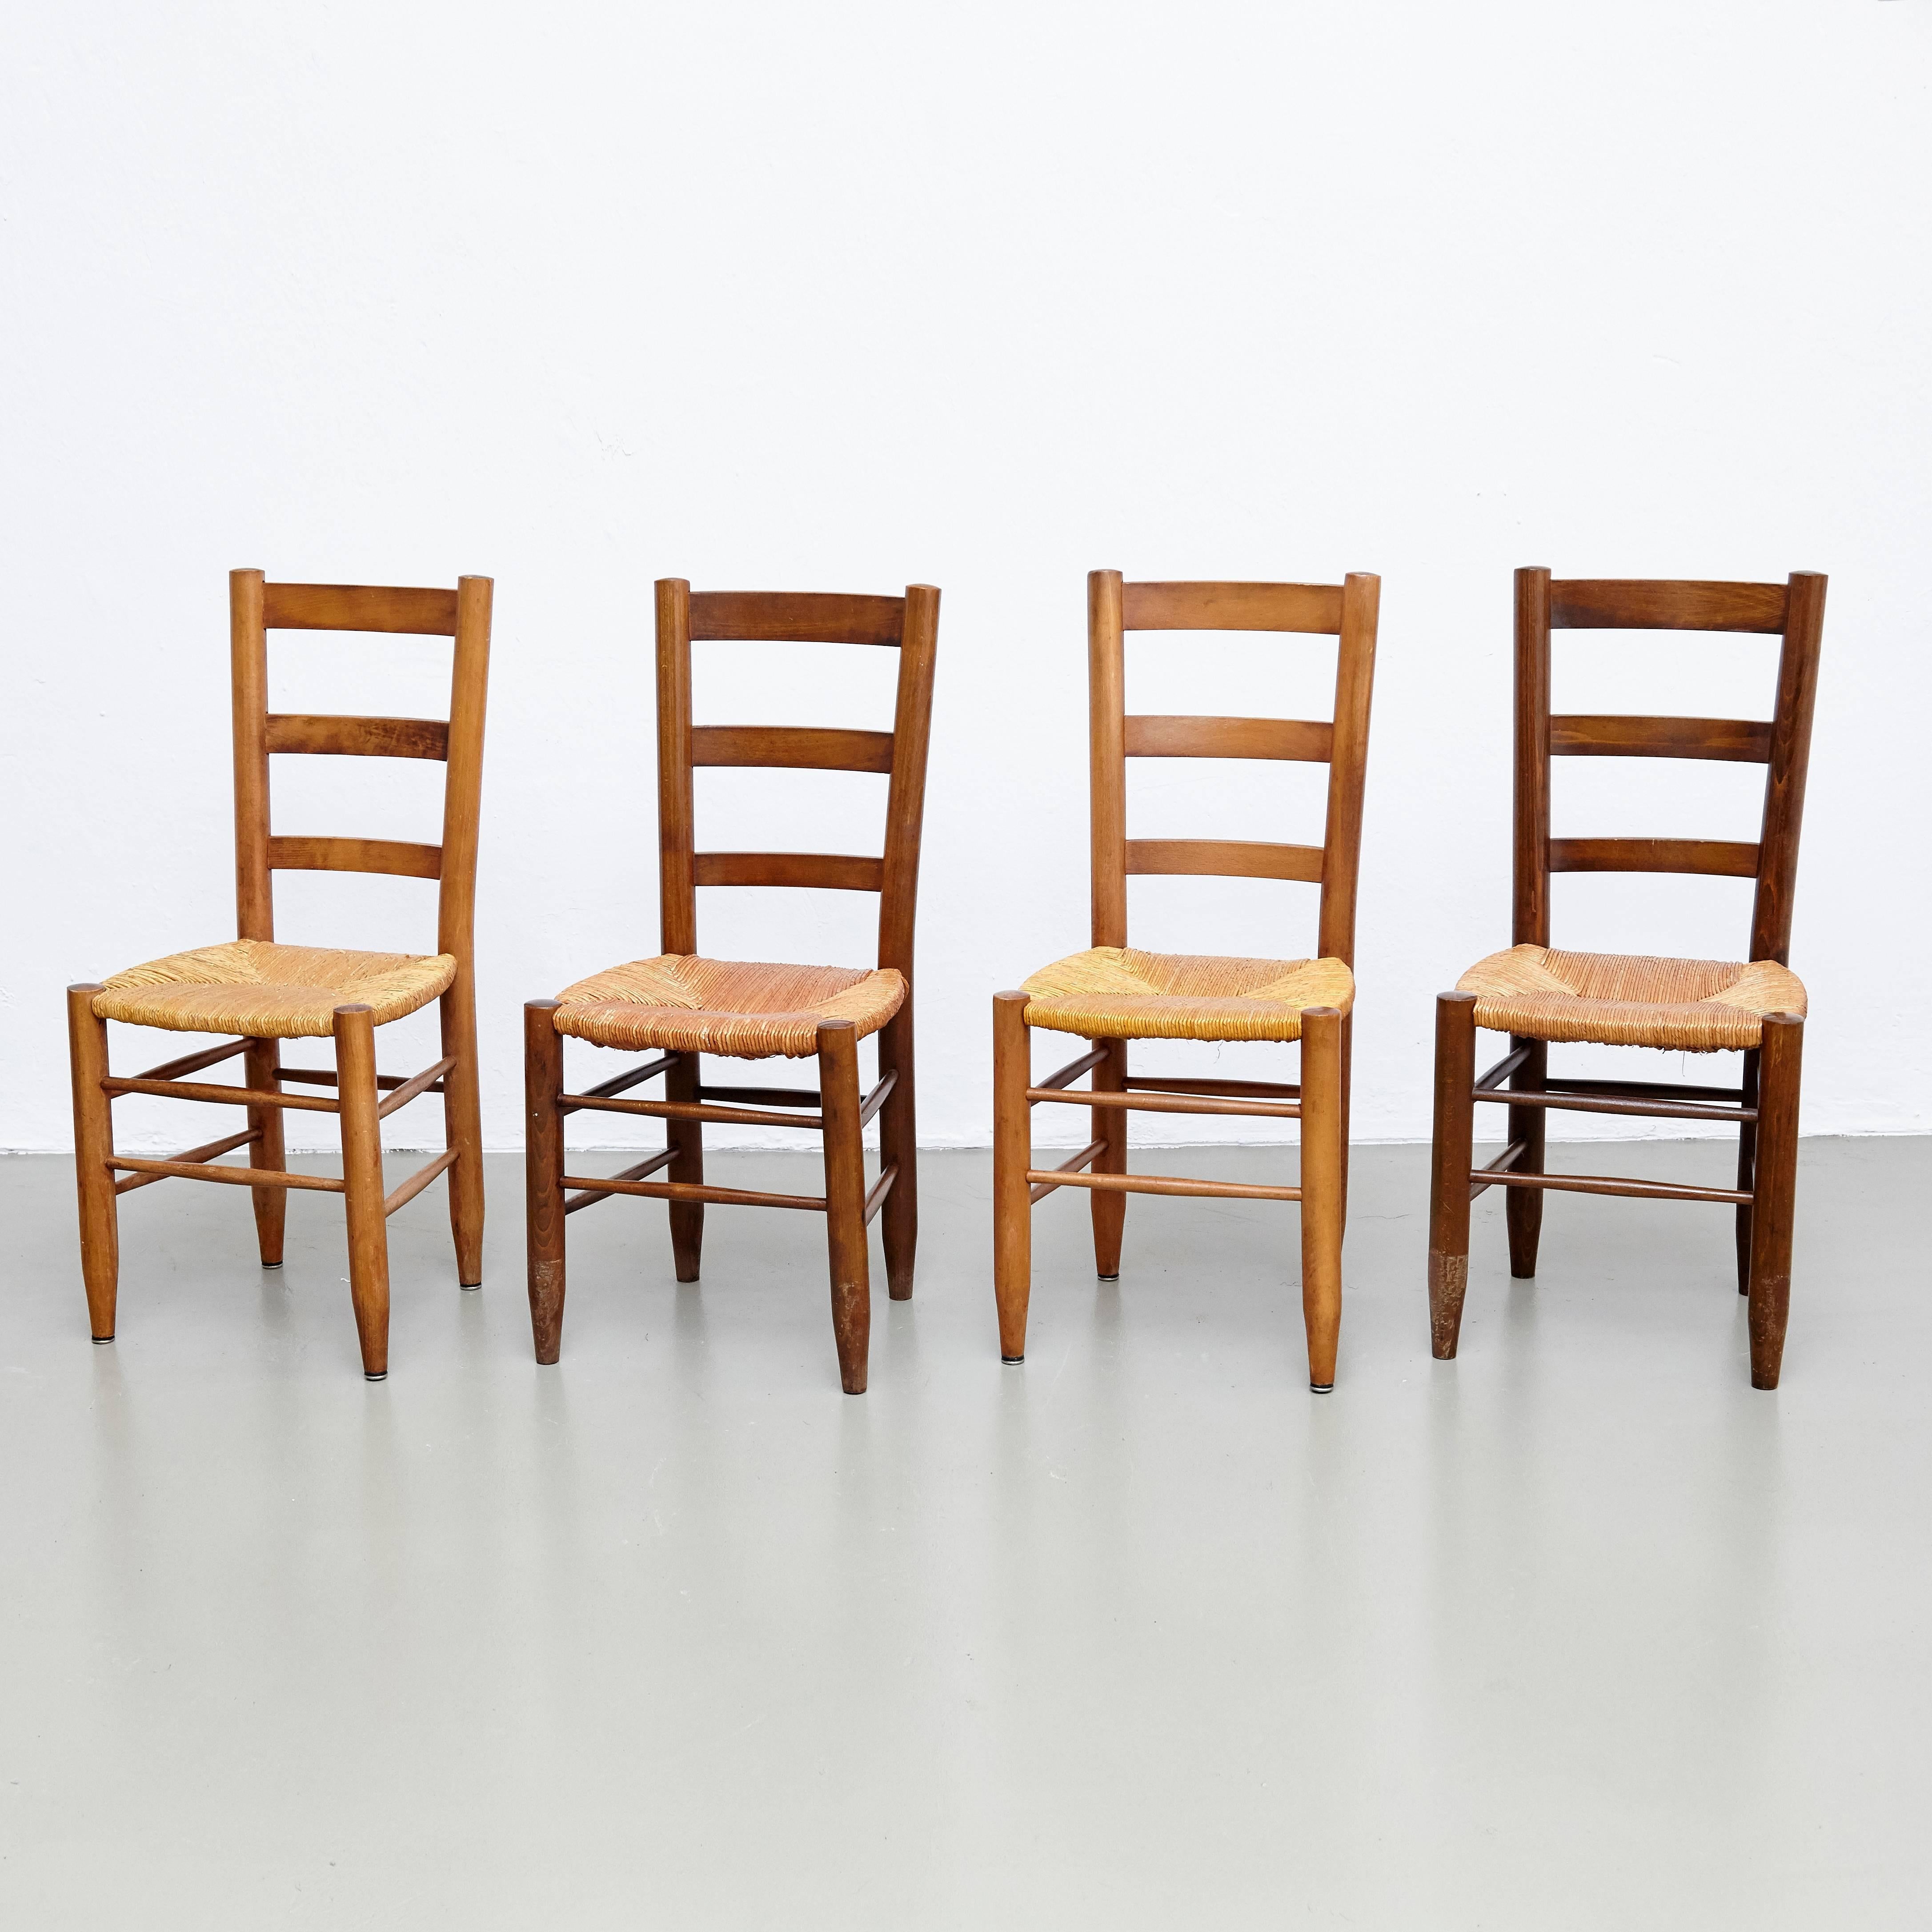 Set of eight dining chairs, model Meribel, designed by Charlotte Perriand, circa 1950.

Solid wood base and legs, and rush seat.

In good original condition, with minor wear consistent with age and use, preserving a beautiful patina. The seats